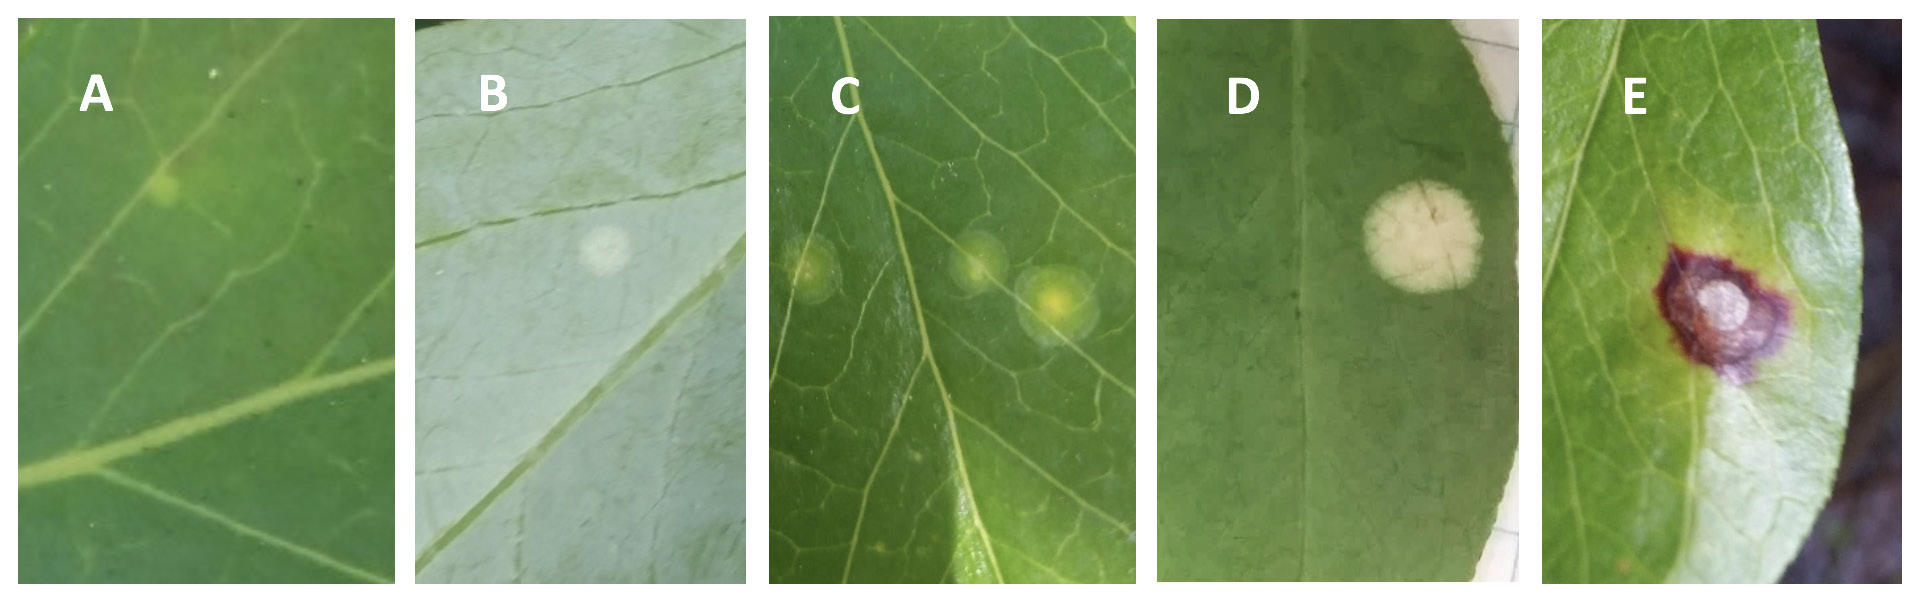 Five images of leaves with spot development. In the first two the spots are small. In the third, the spots are more yellow in the center and less yellowed in a ring around them. In the fourth, the spot is large and evenly colored, and in the last there is an irregularly shaped brown spot around the main spot.